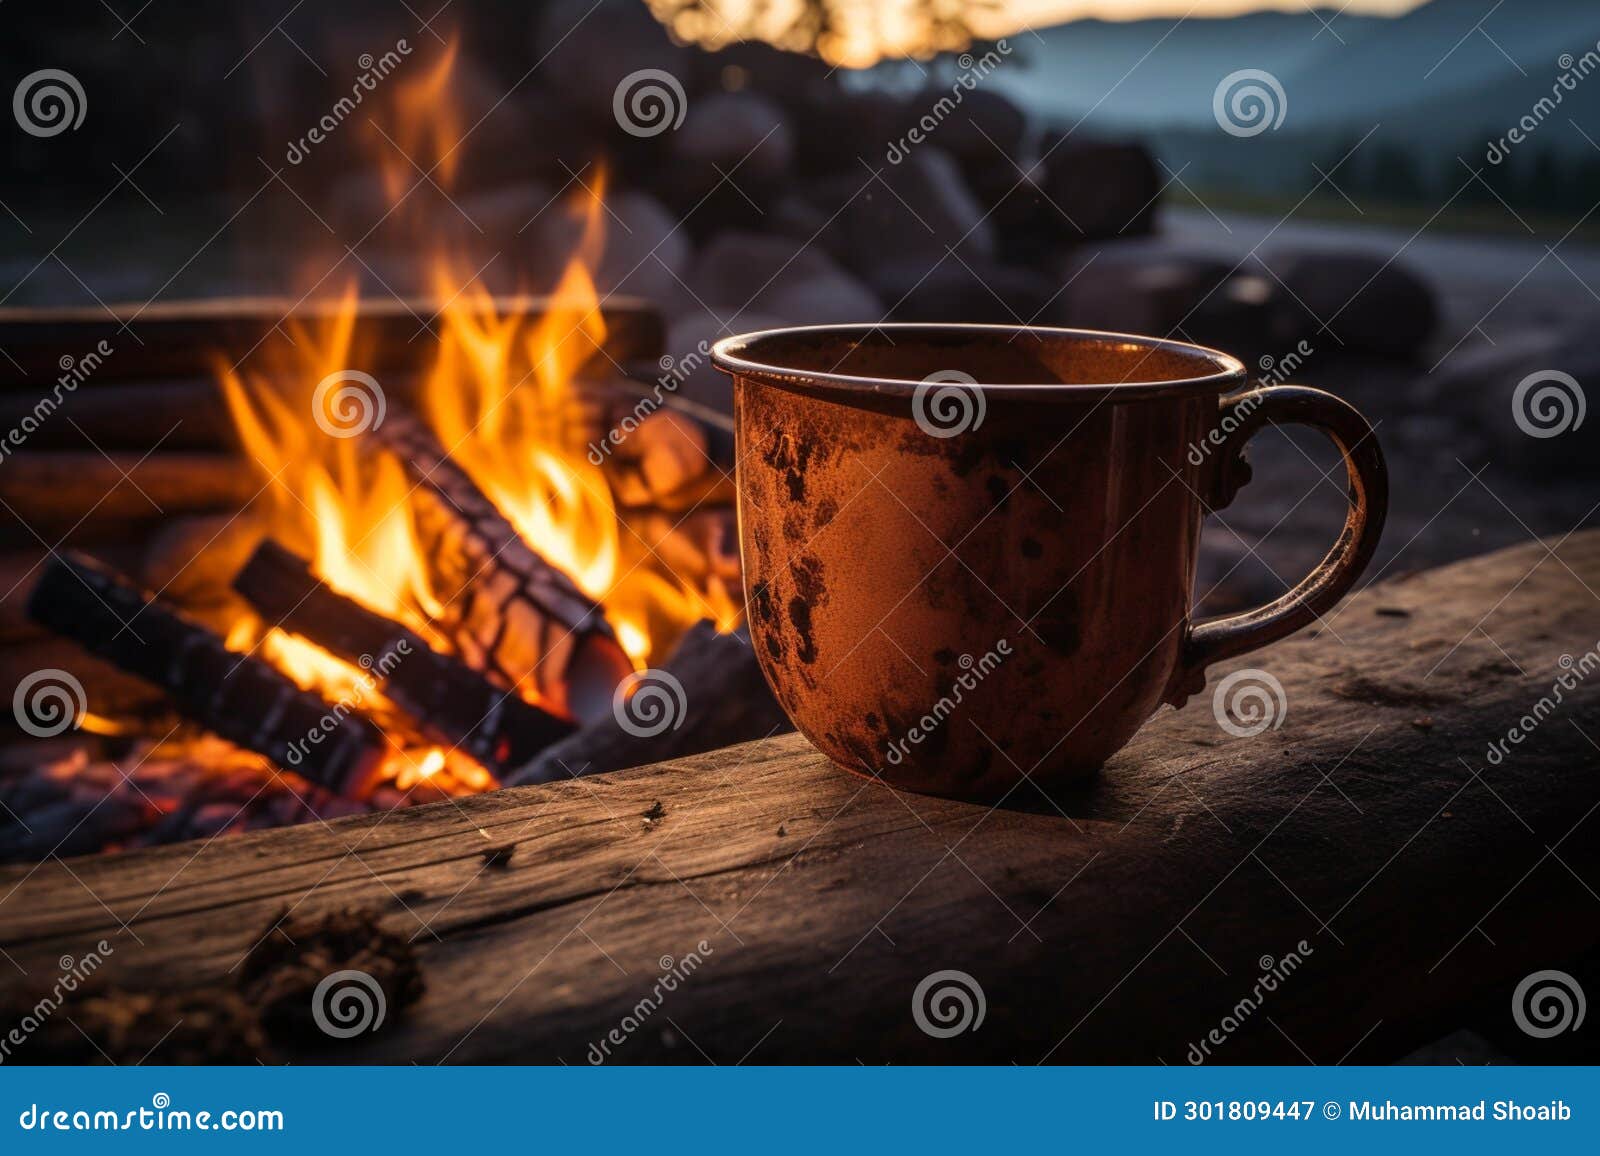 inviting coffee in norways wilderness, bathed in campfires golden light